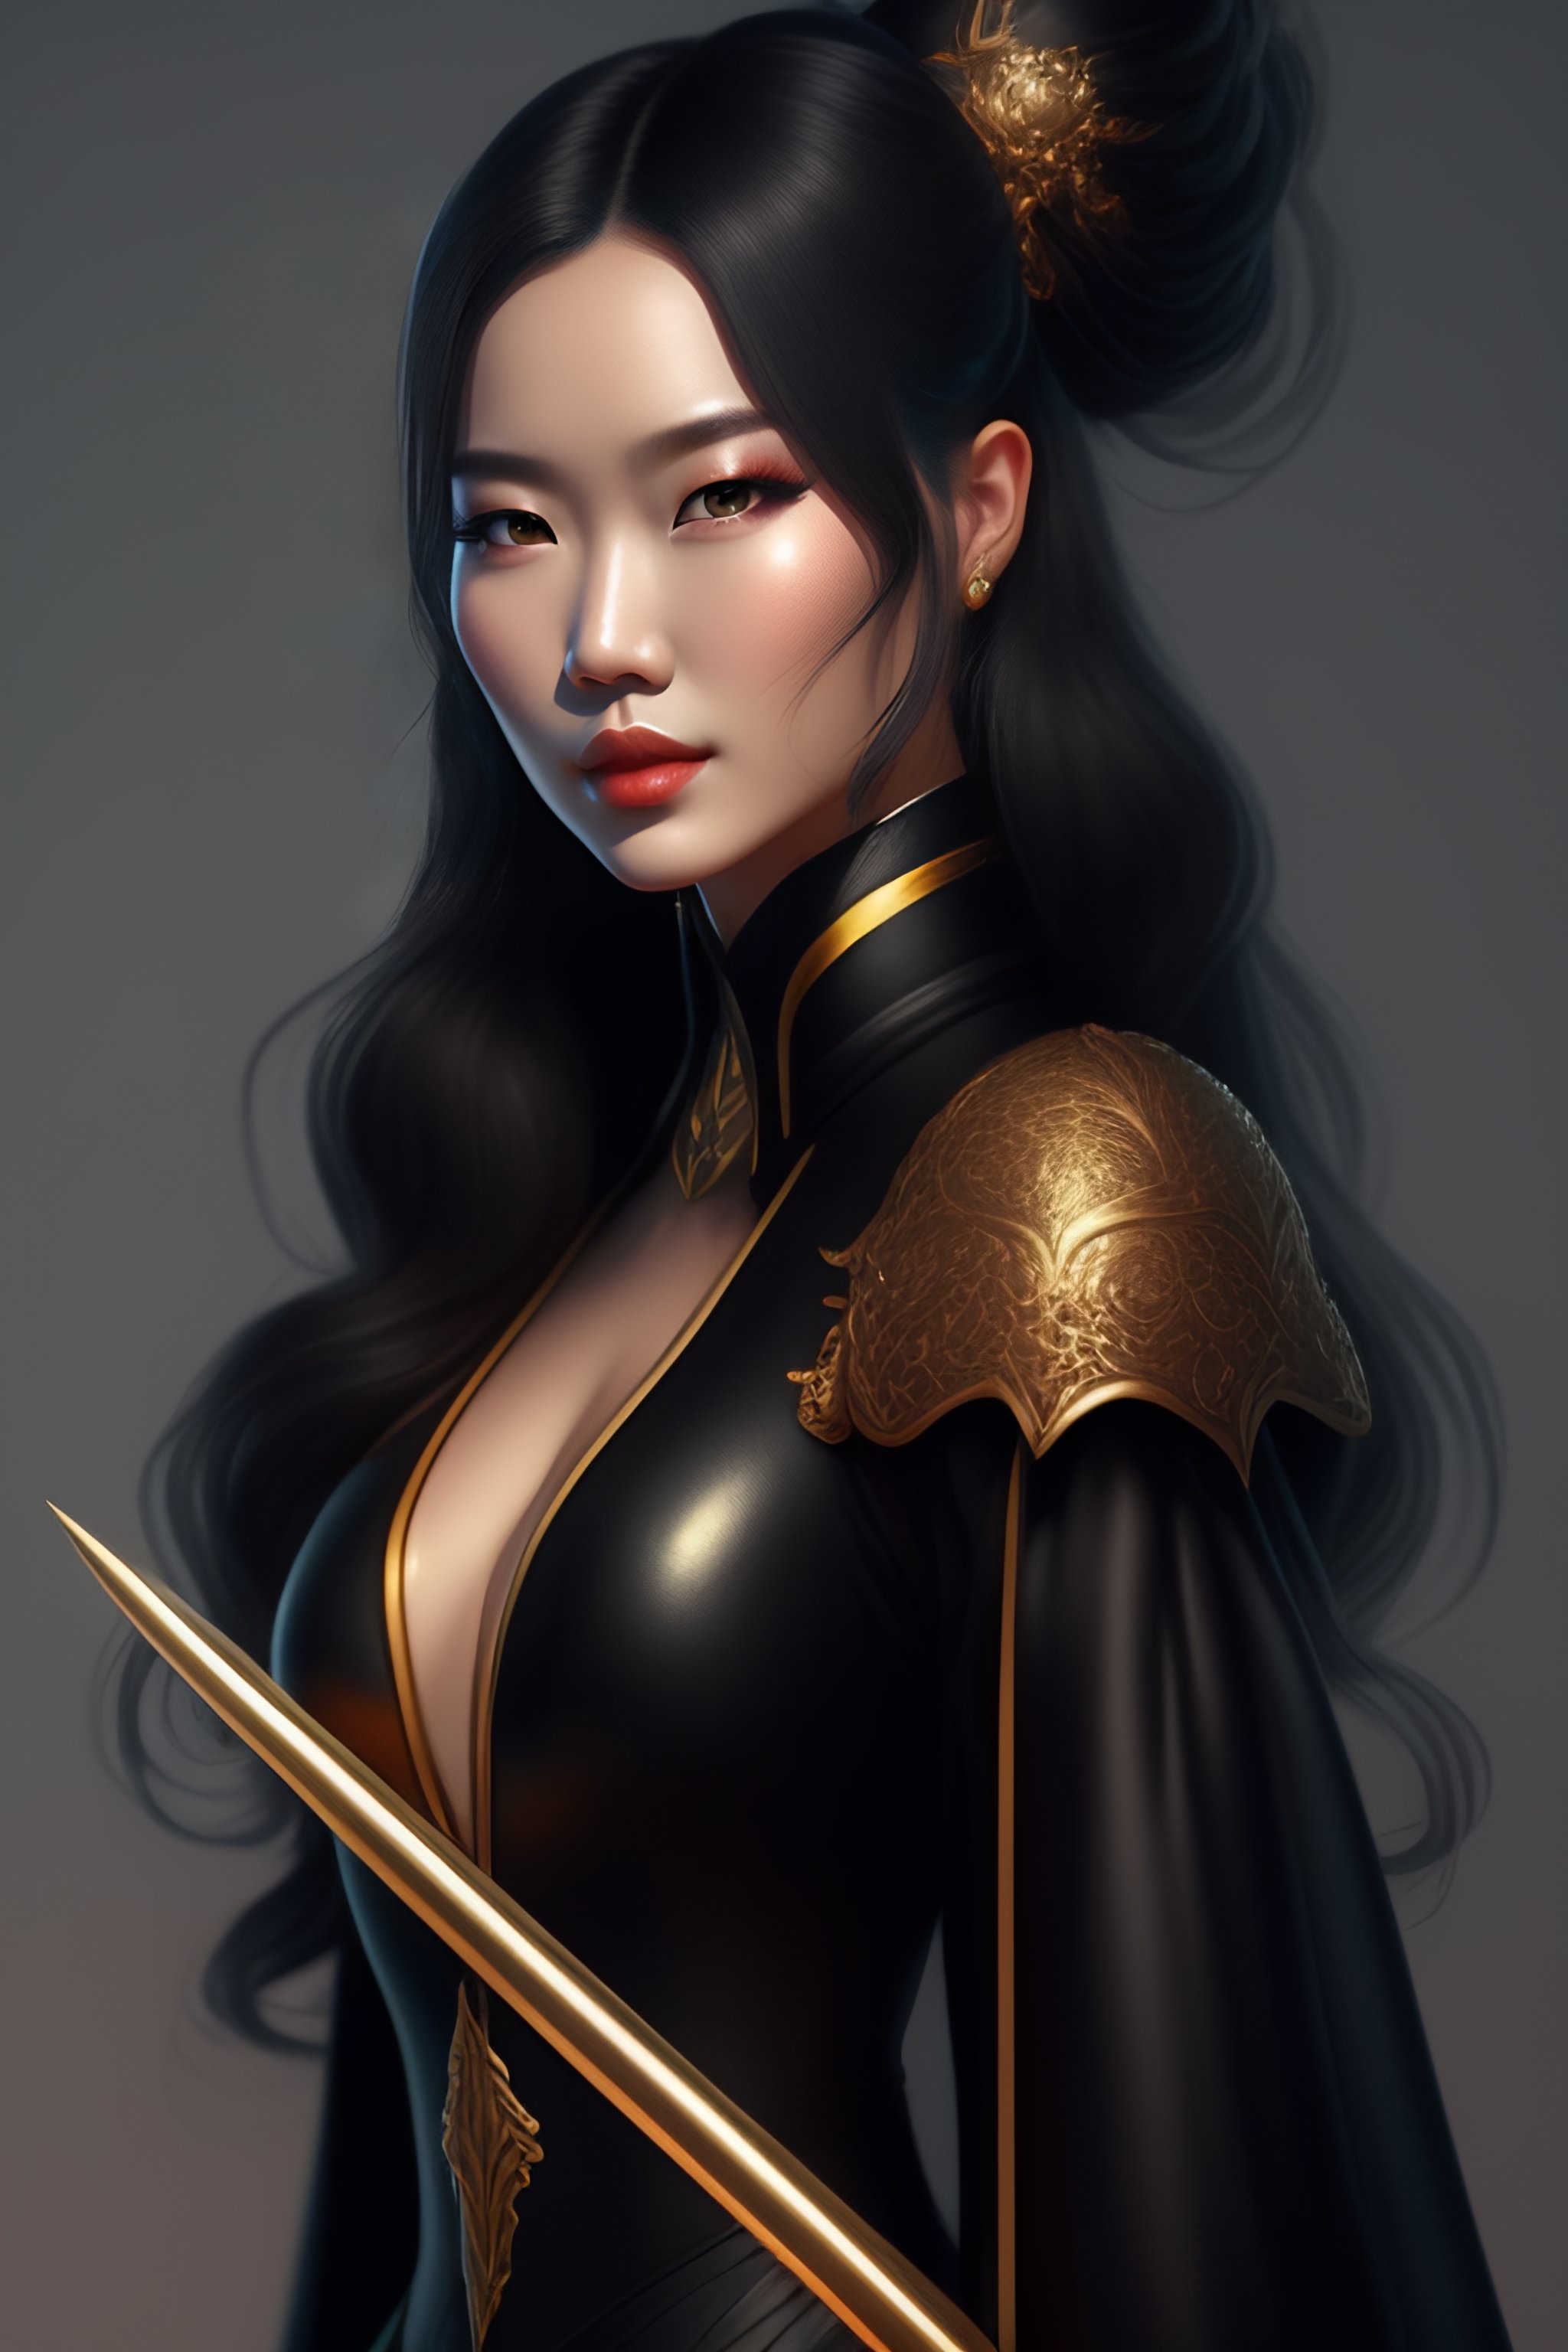 Lexica - A woman in a black outfit holding a wand, a character portrait ...